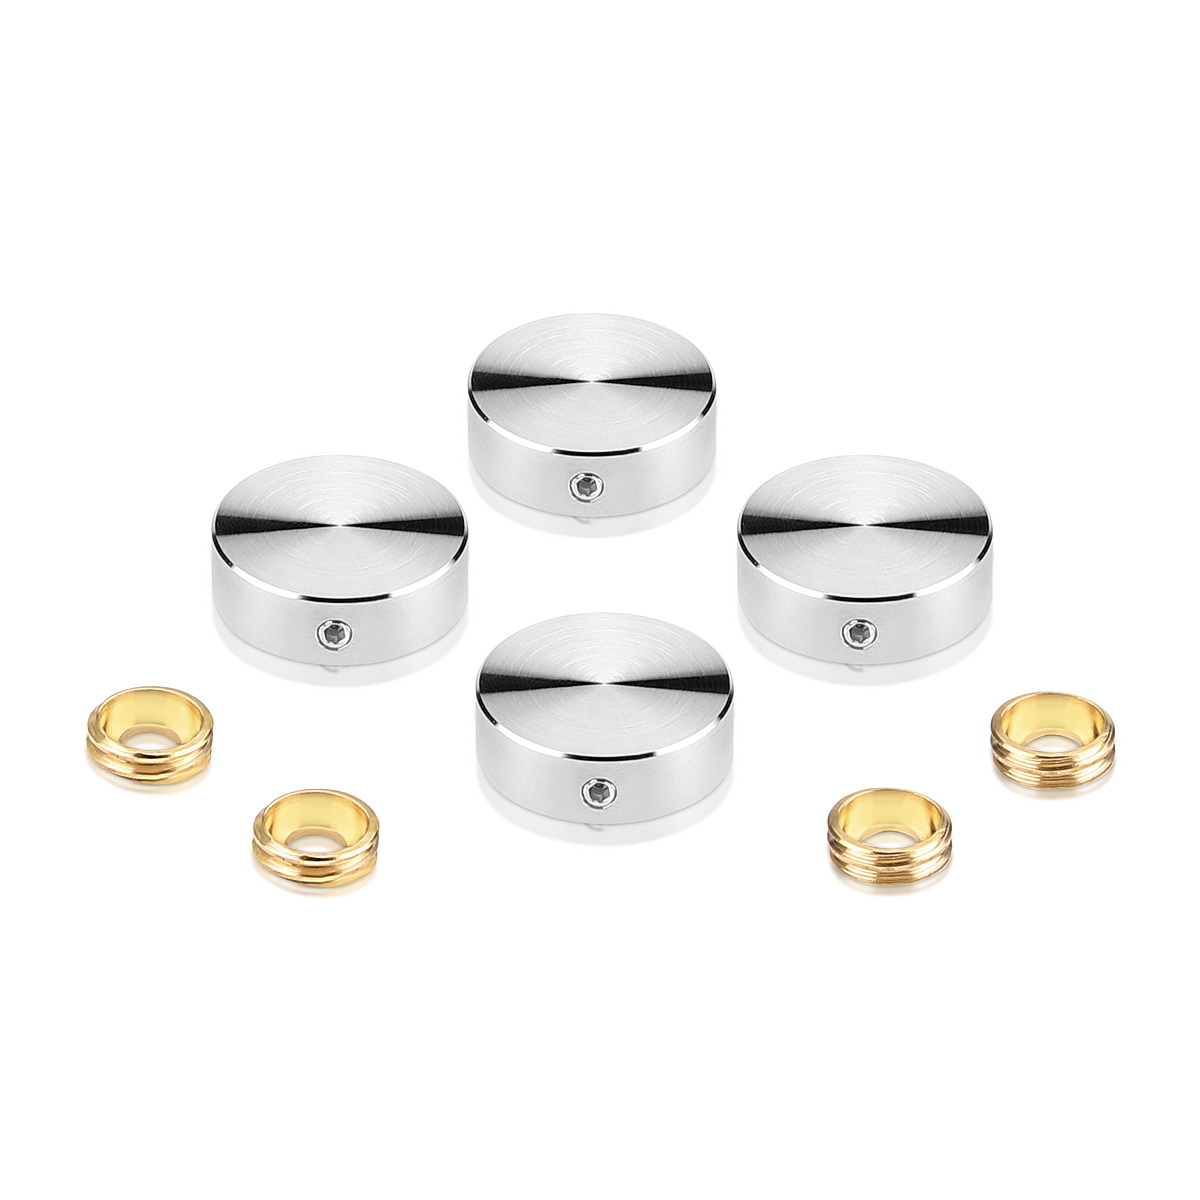 Set of 4 Locking Screw Cover Diameter 13/16'', Satin Brushed Stainless Steel Finish (Indoor Use Only)